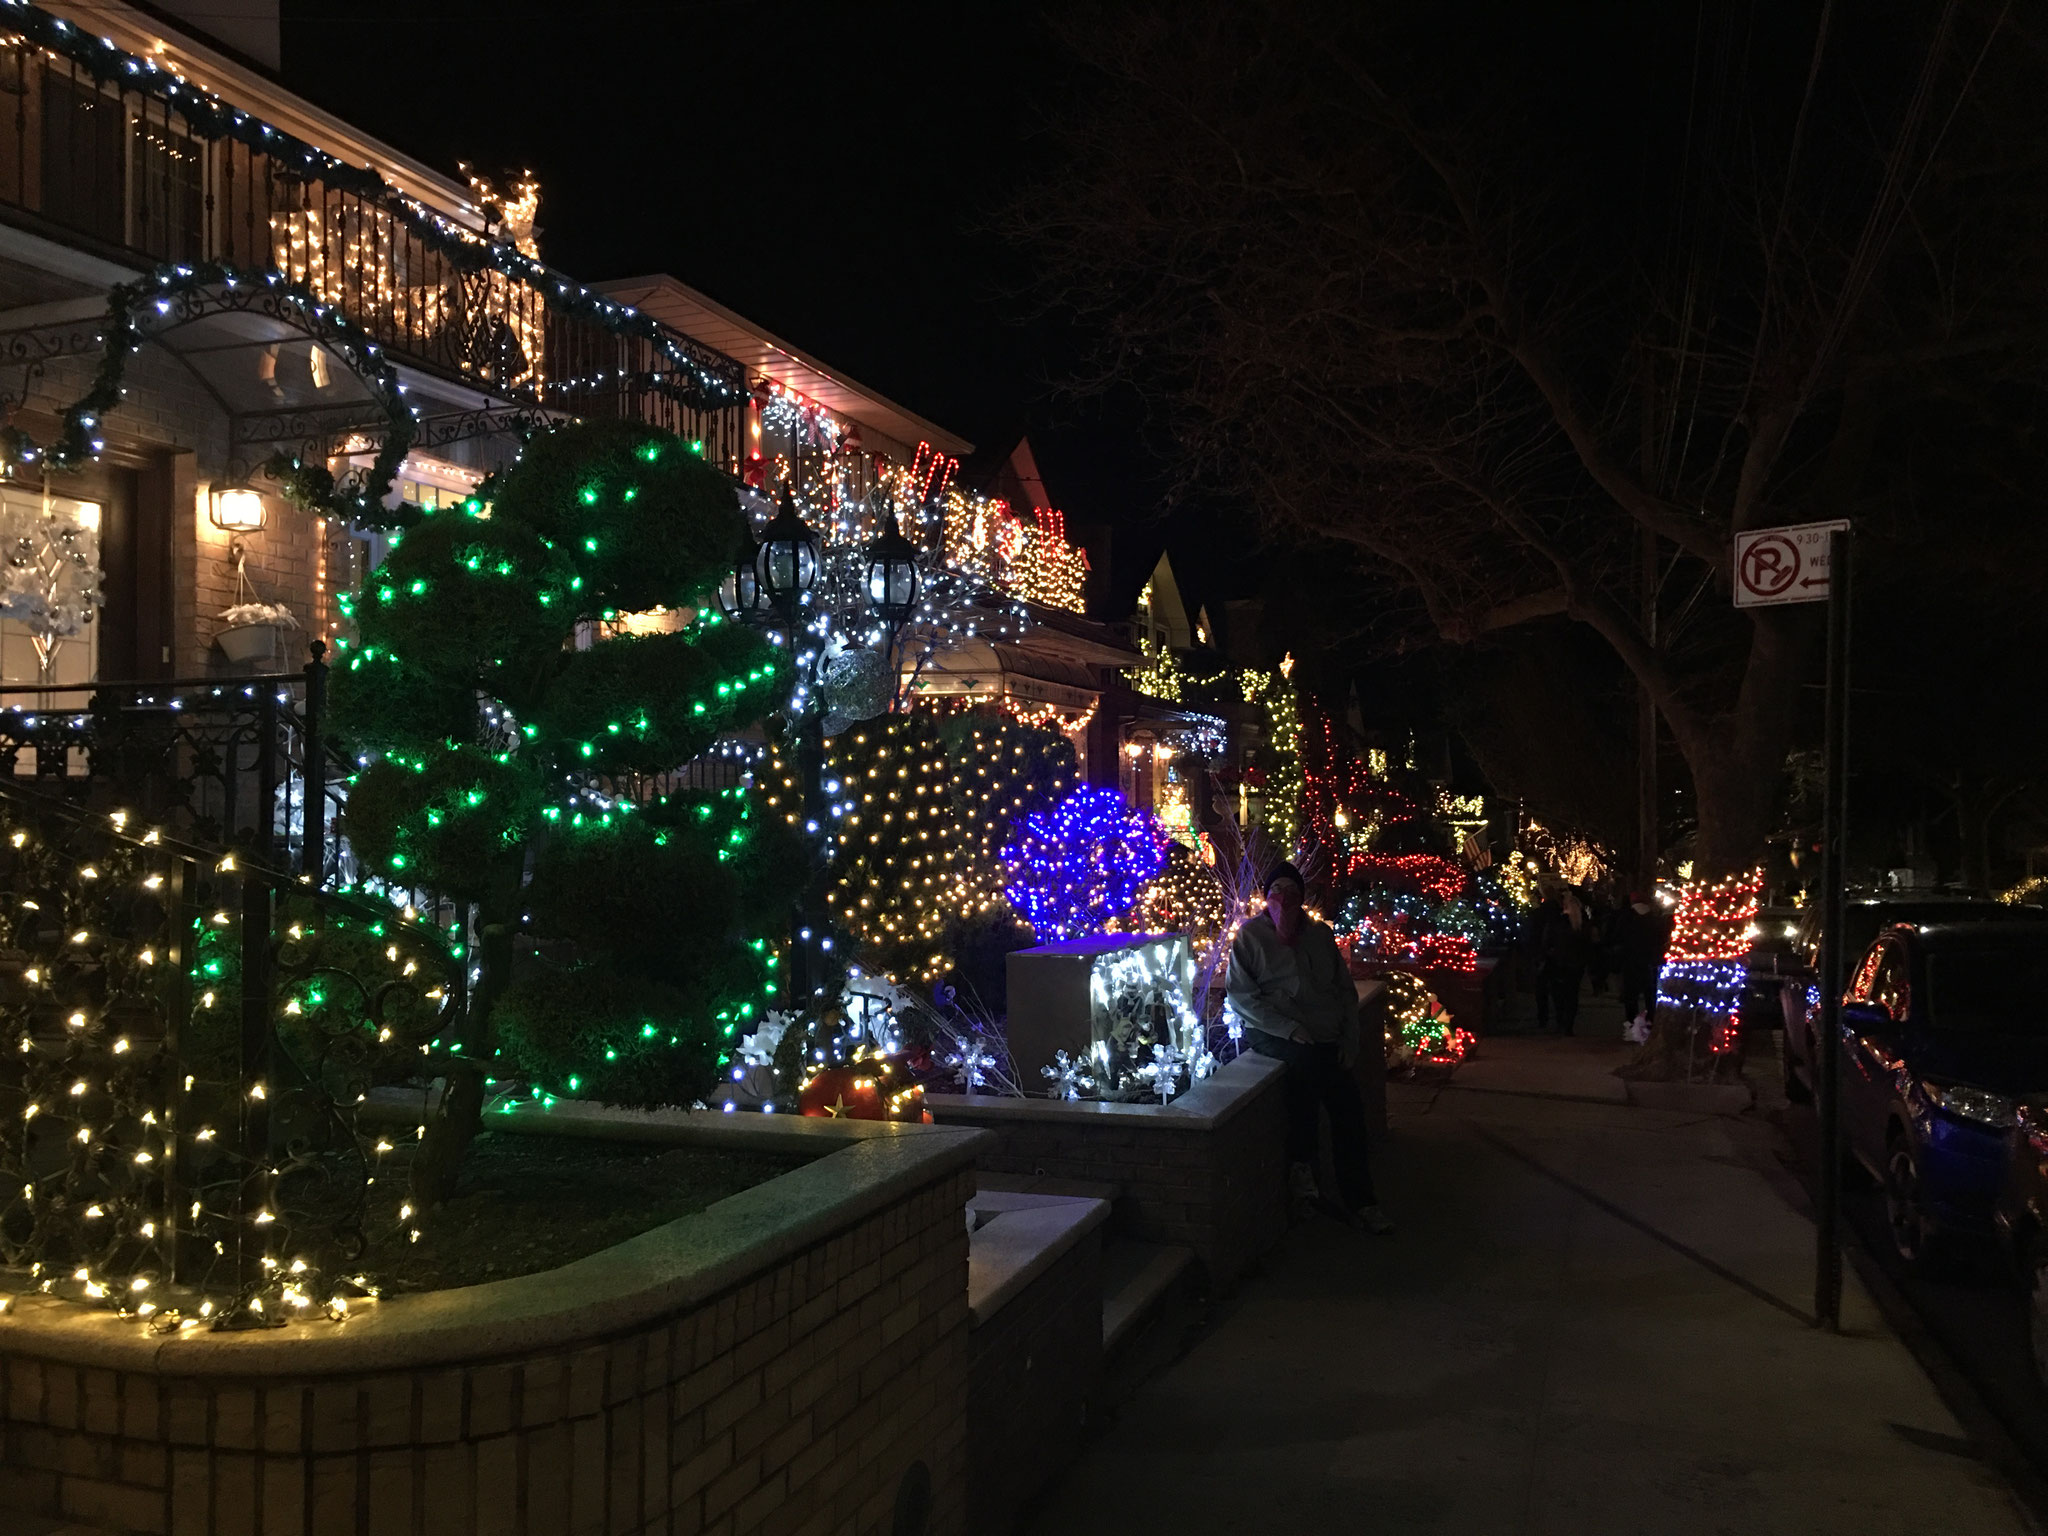 The Bandit 30, Xmas Lights, Dyker Heights 12-13-20